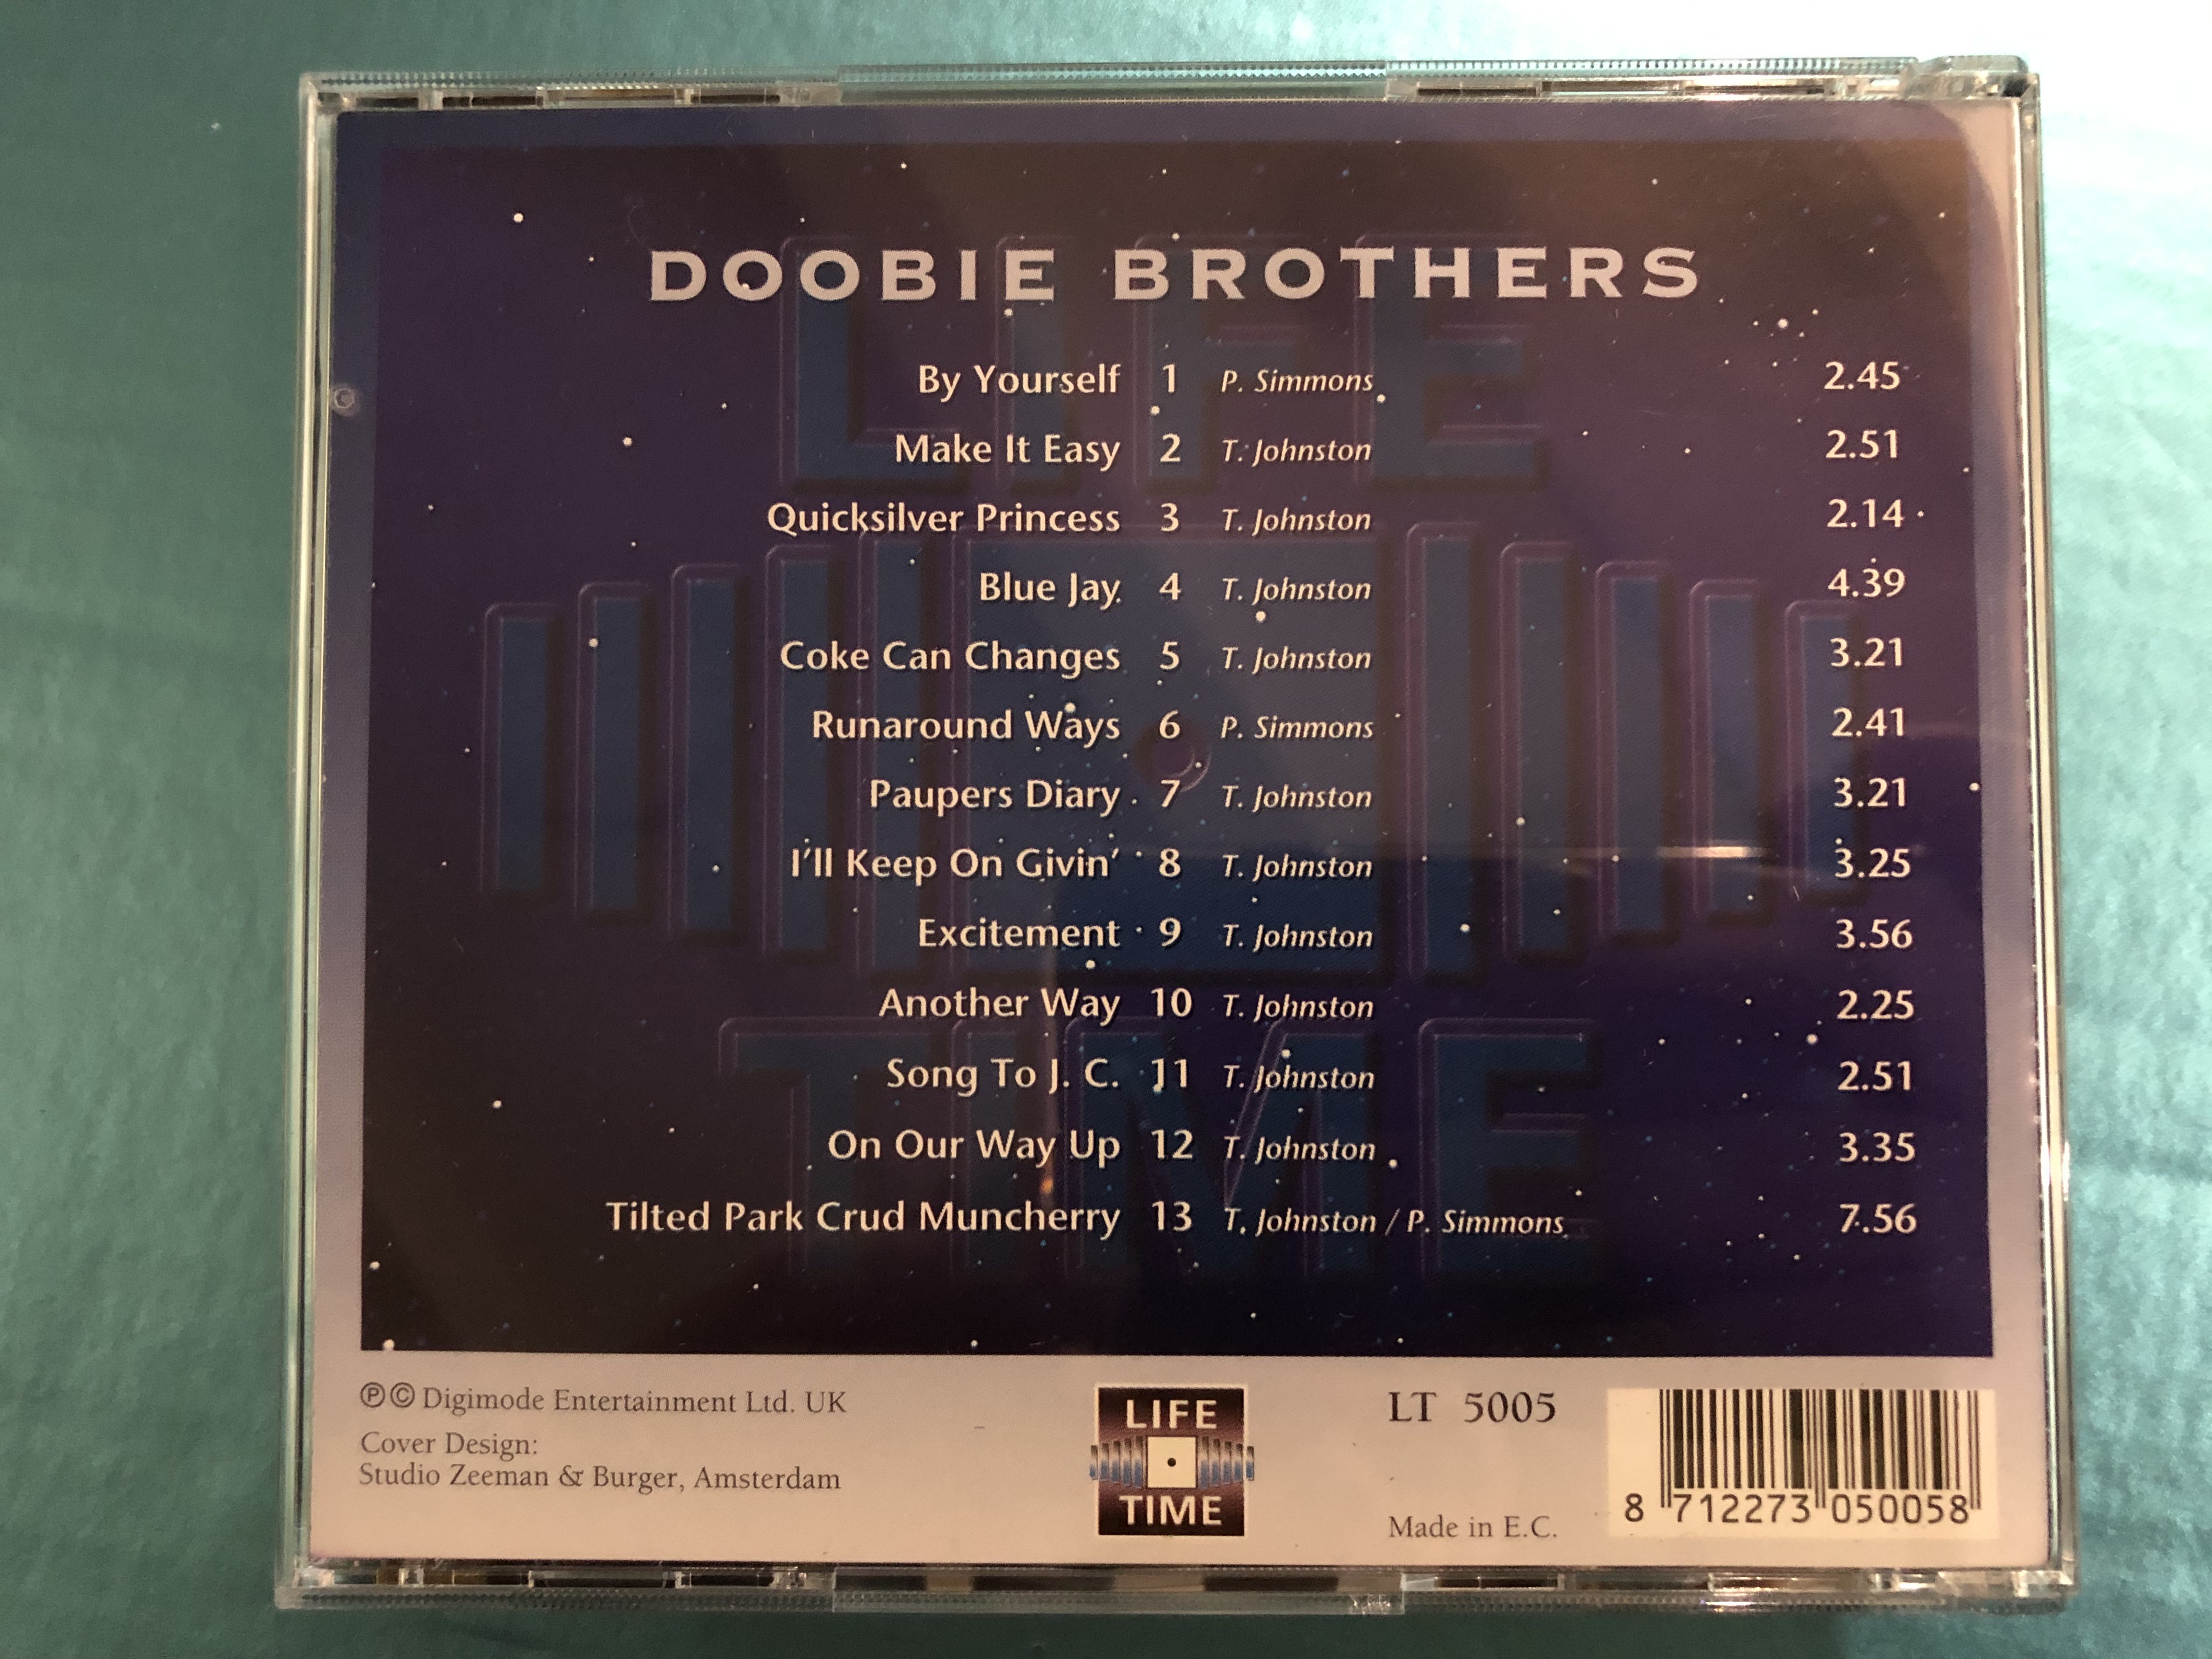 the-doobie-brothers-excitement-tilted-park-crud-muncherry-blue-jay-by-yourself-life-time-audio-cd-lt-5005-4-.jpg